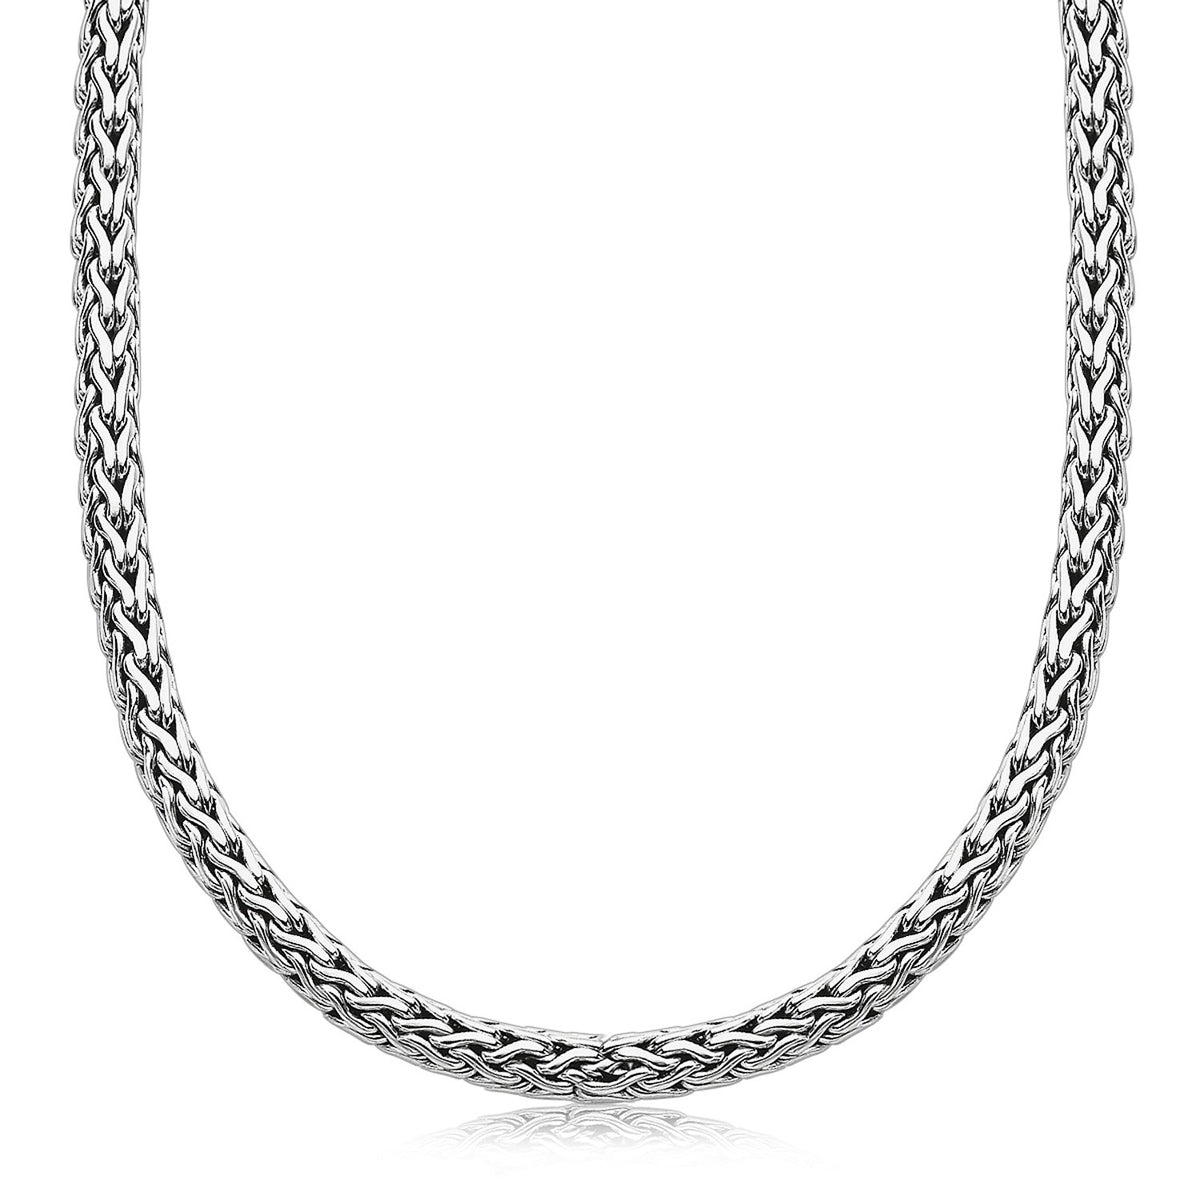 Wheat Style Chain - Oxidized Sterling Silver